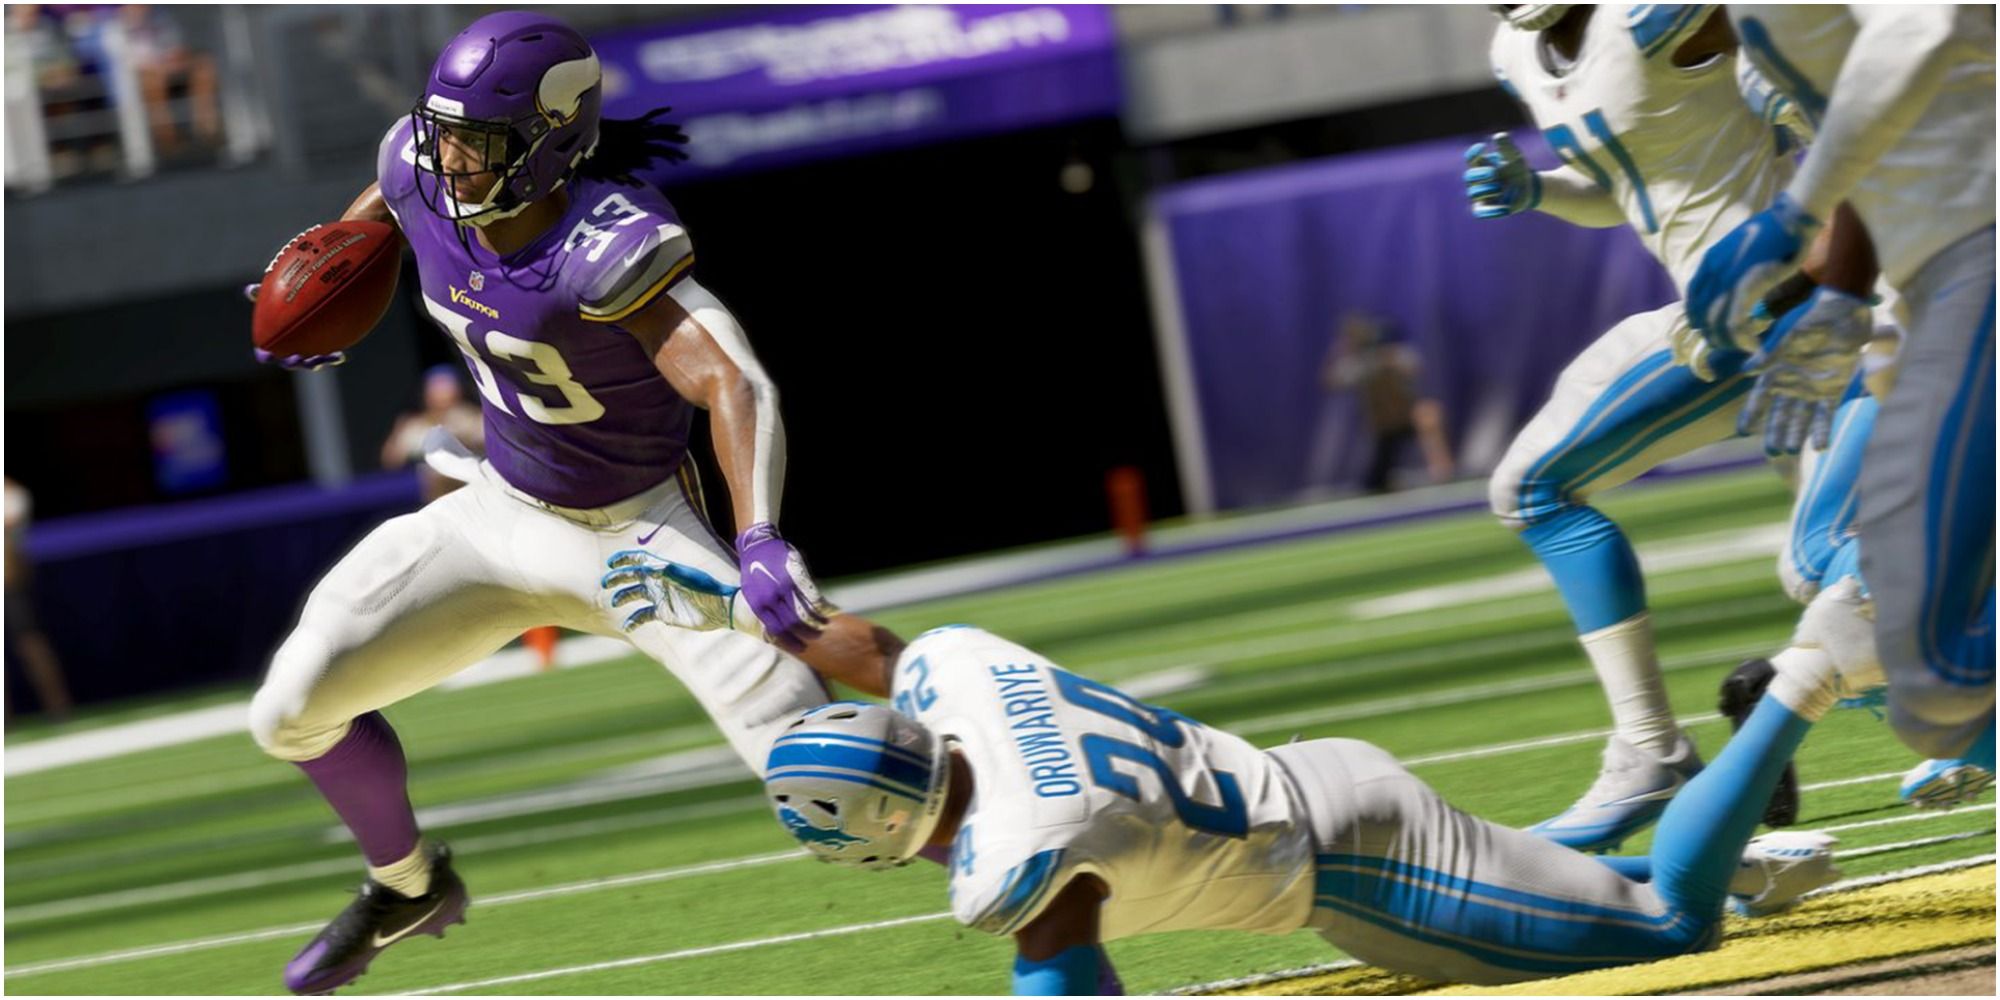 Madden NFL 22 Dalvin Cook Breaking To The Outside Against The Lions